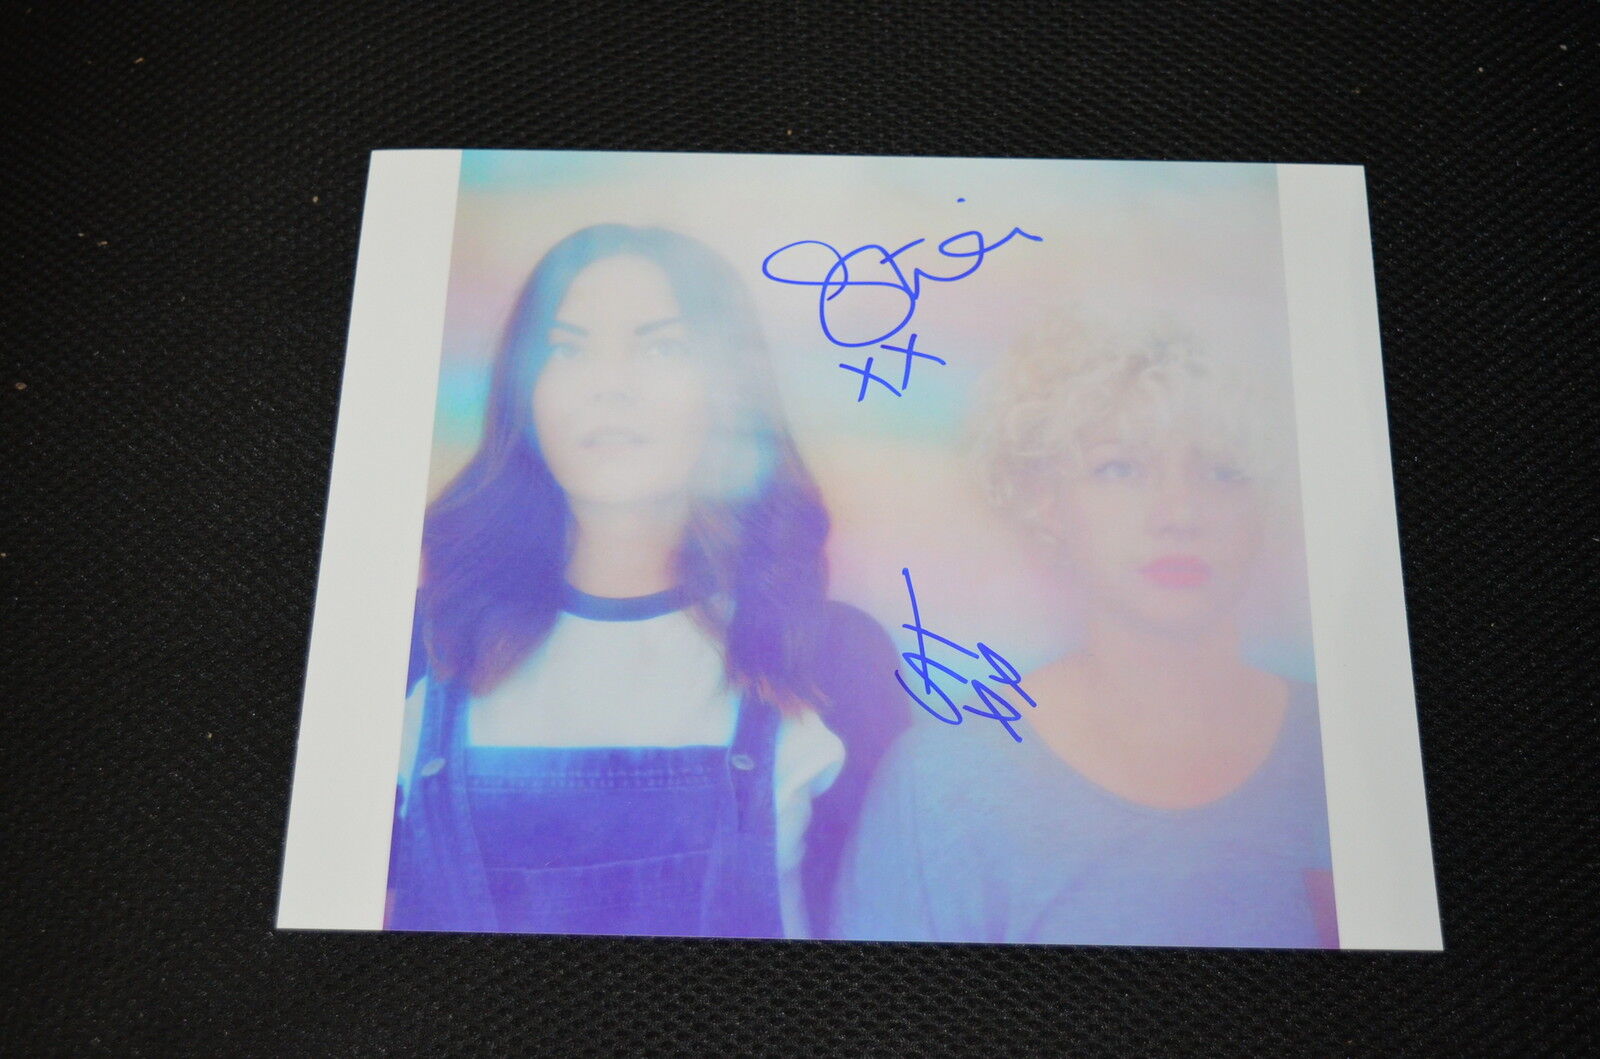 HONEYBLOOD signed autograph In Person 8x10 (20x25 cm) SCOTTISH MUSICAL DUO